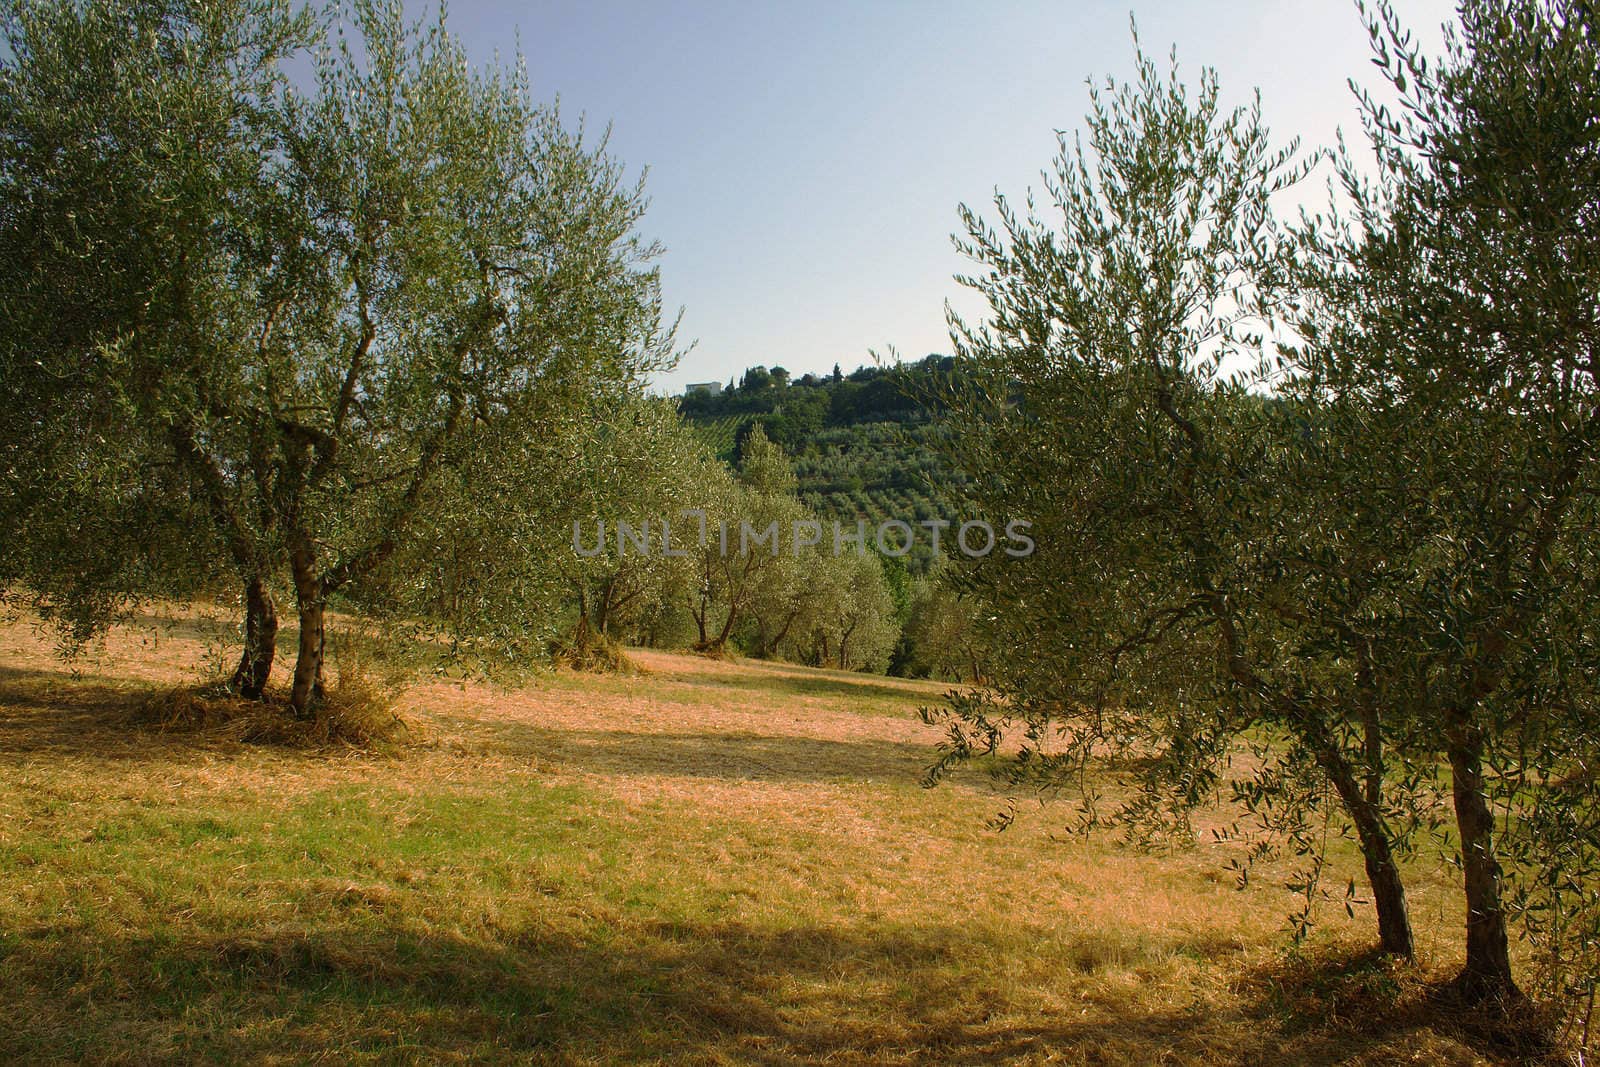 Tuscany landscape including olive trees and a hill in the distance